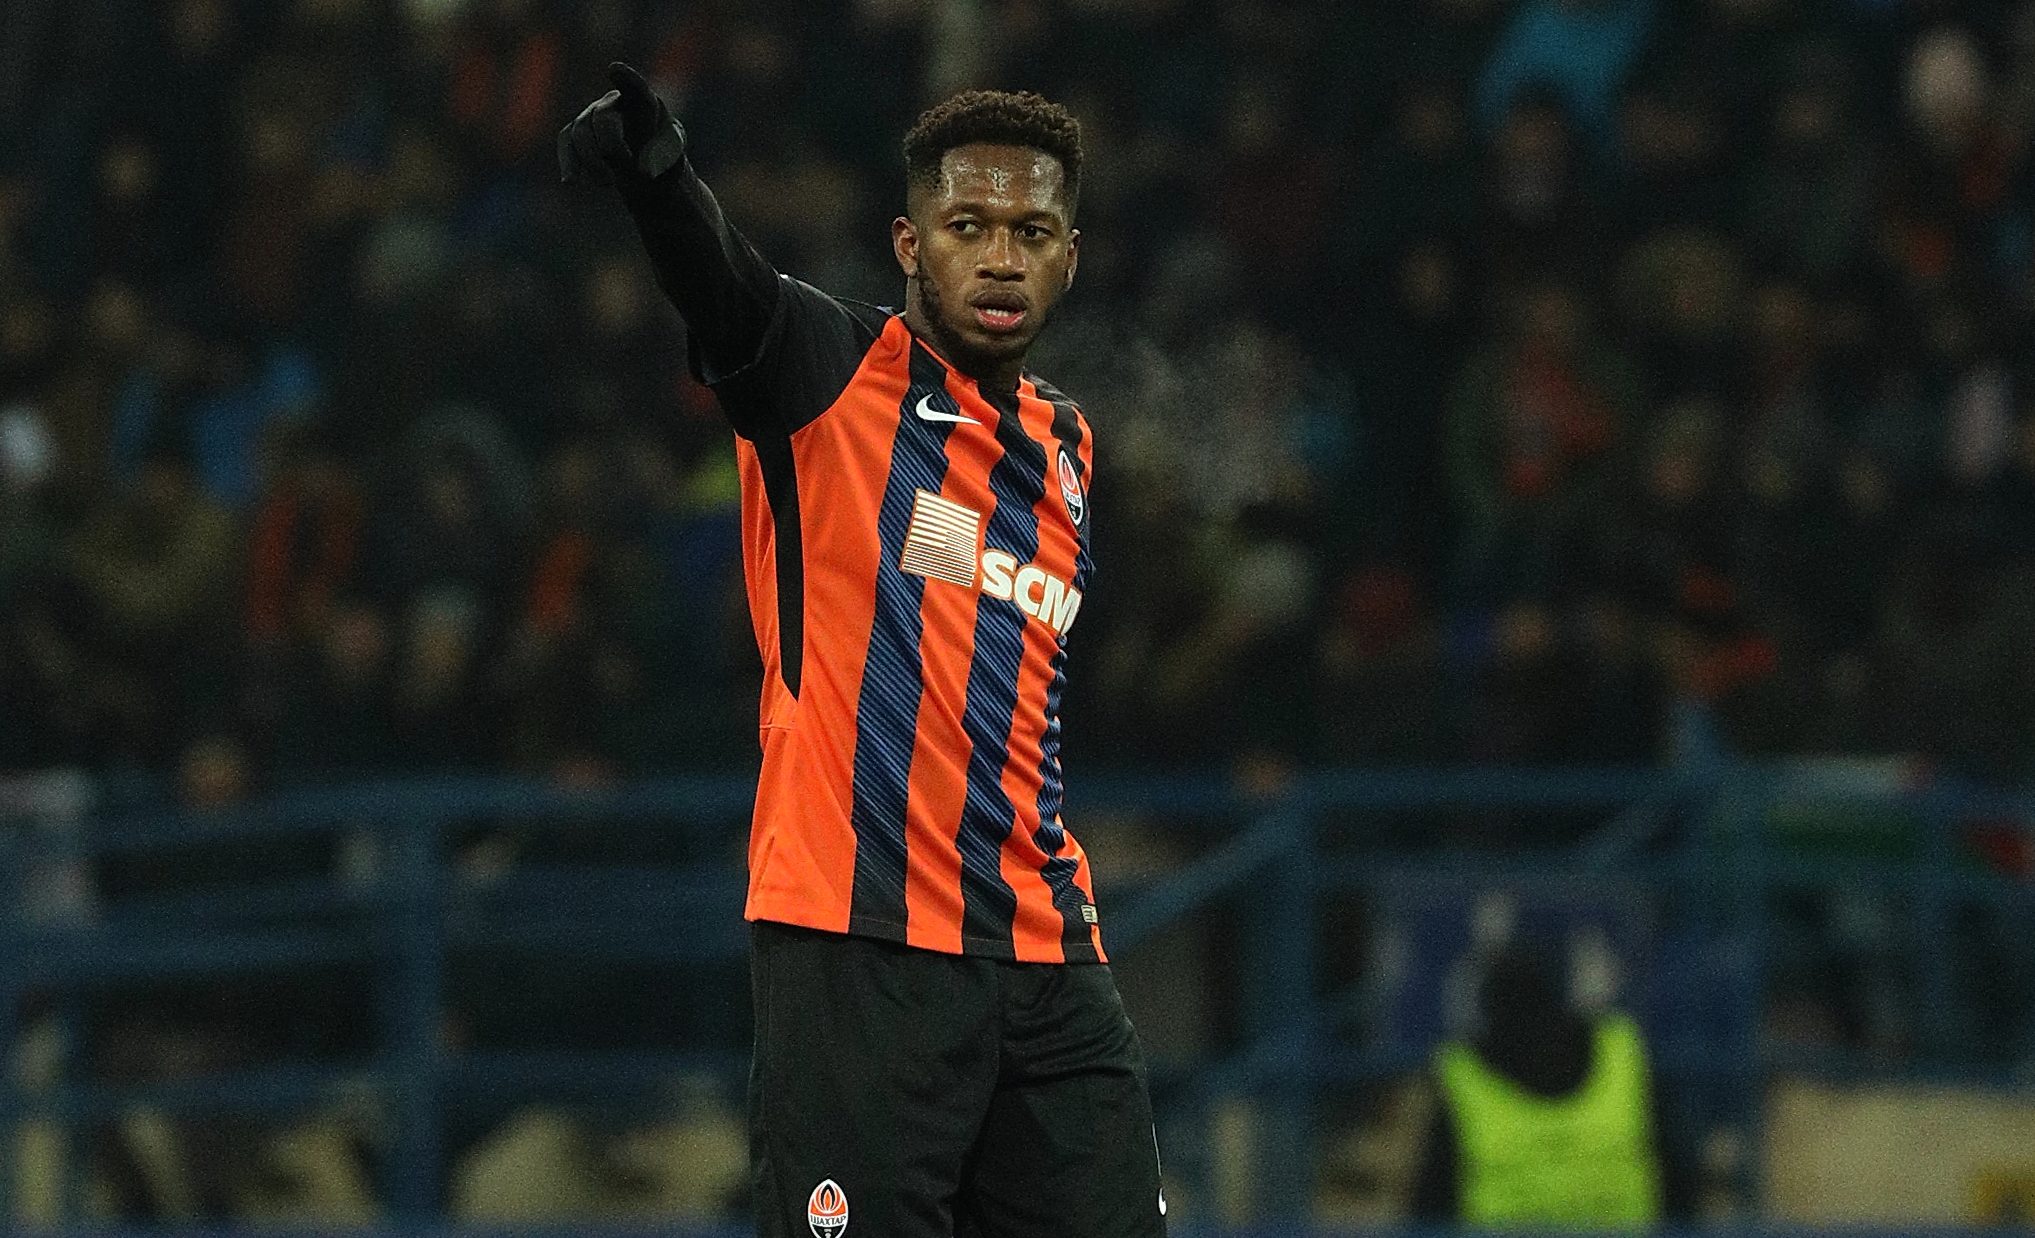 Manchester United reportedly reach £44m agreement to sign Fred from Shakhtar Donetsk